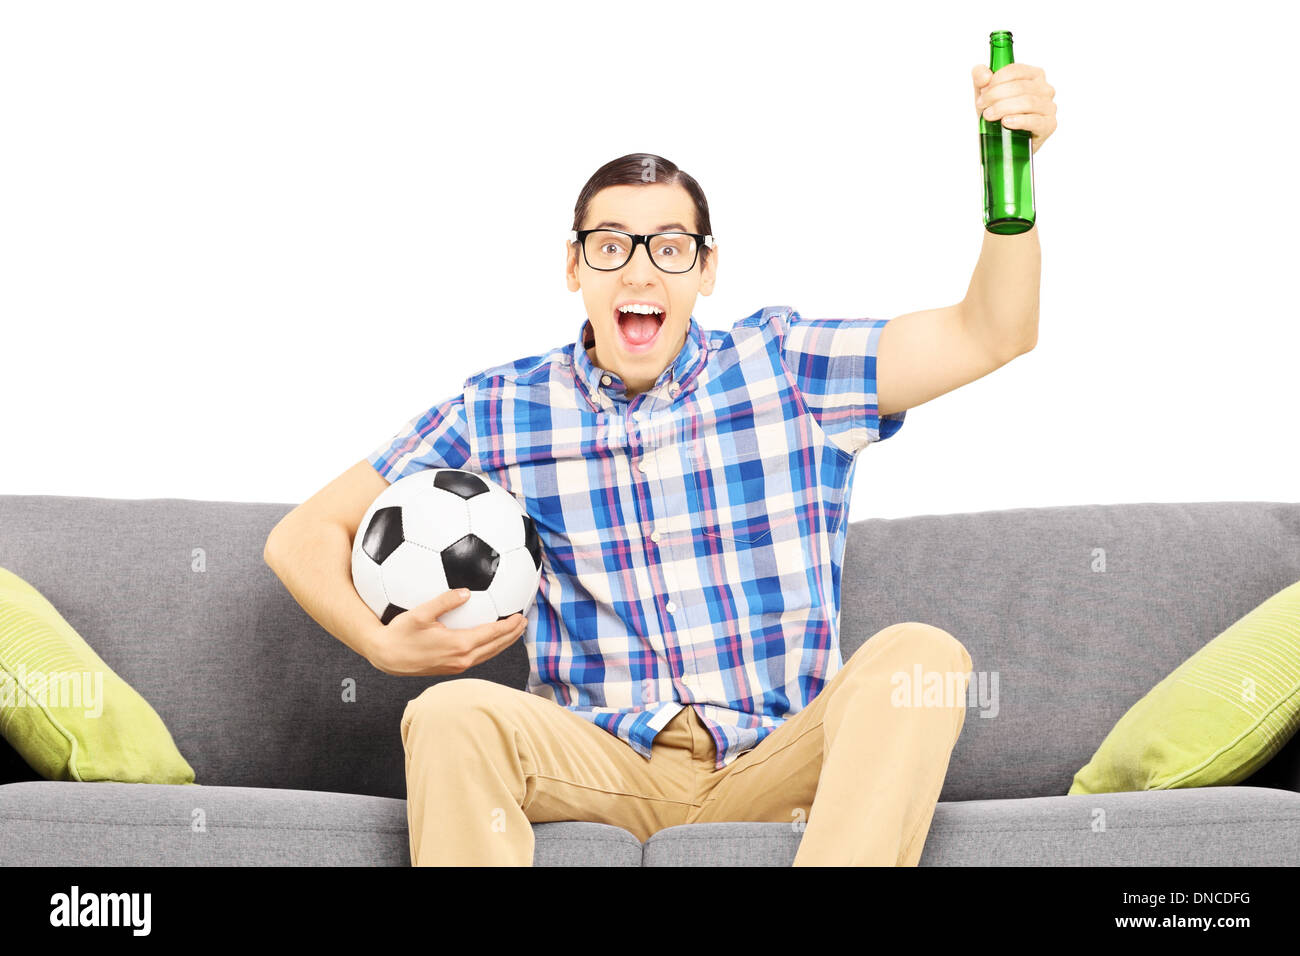 Excited male sport fan with soccer ball and beer watching sport Stock Photo